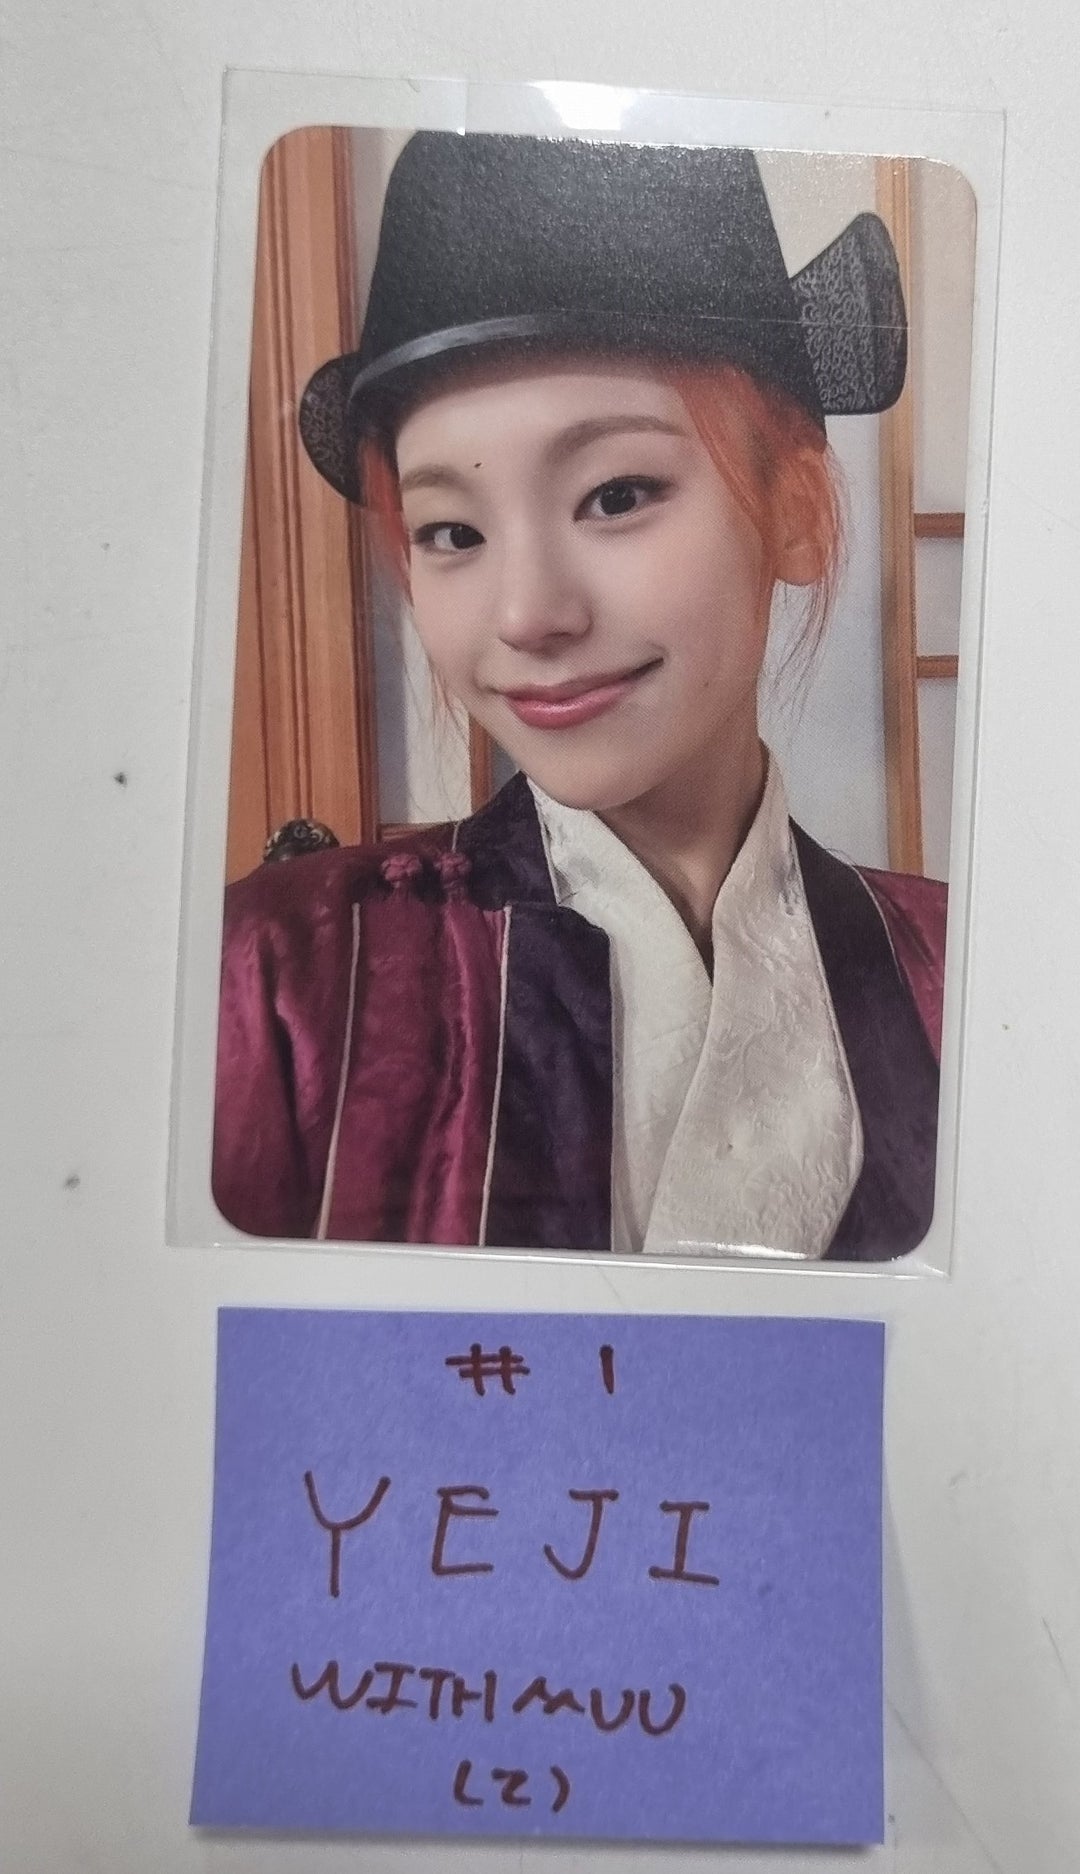 ITZY "BORN TO BE" - Withmuu Fansign Event Photocard Round 3 [24.3.13]